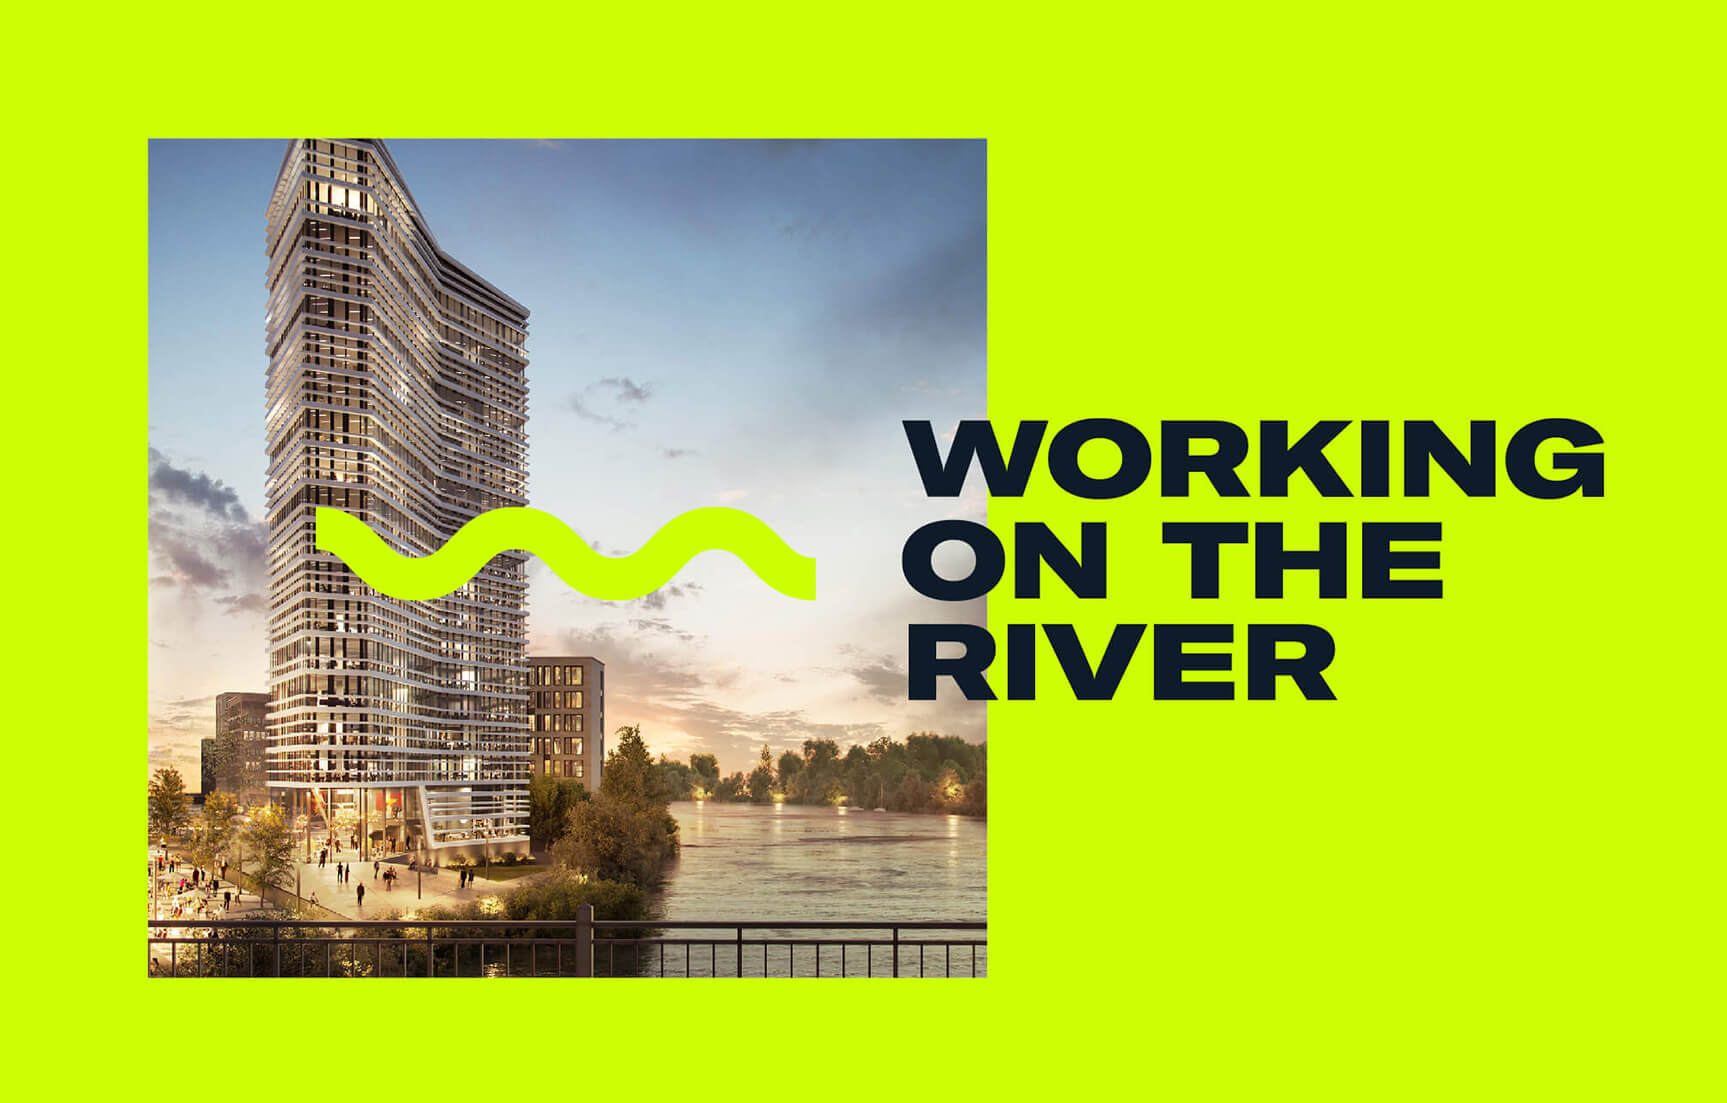 OF SHORE – working on the river